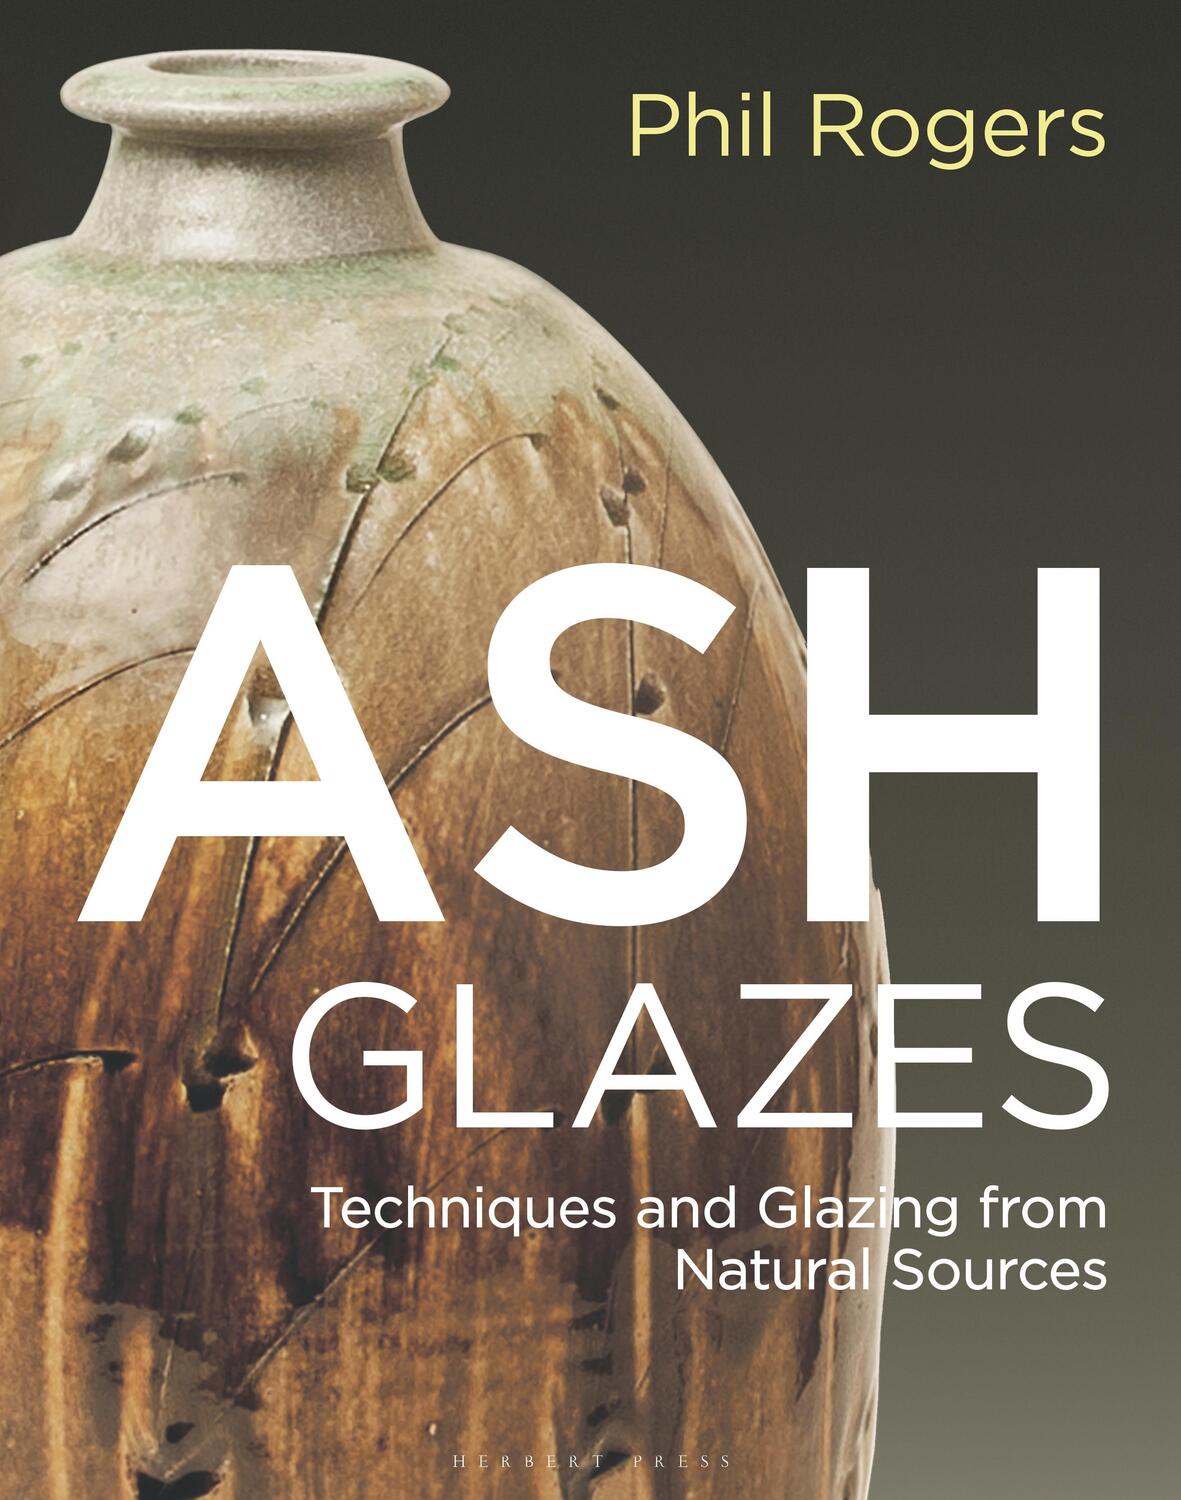 Autor: 9781789940947 | Ash Glazes | Techniques and Glazing from Natural Sources | Phil Rogers